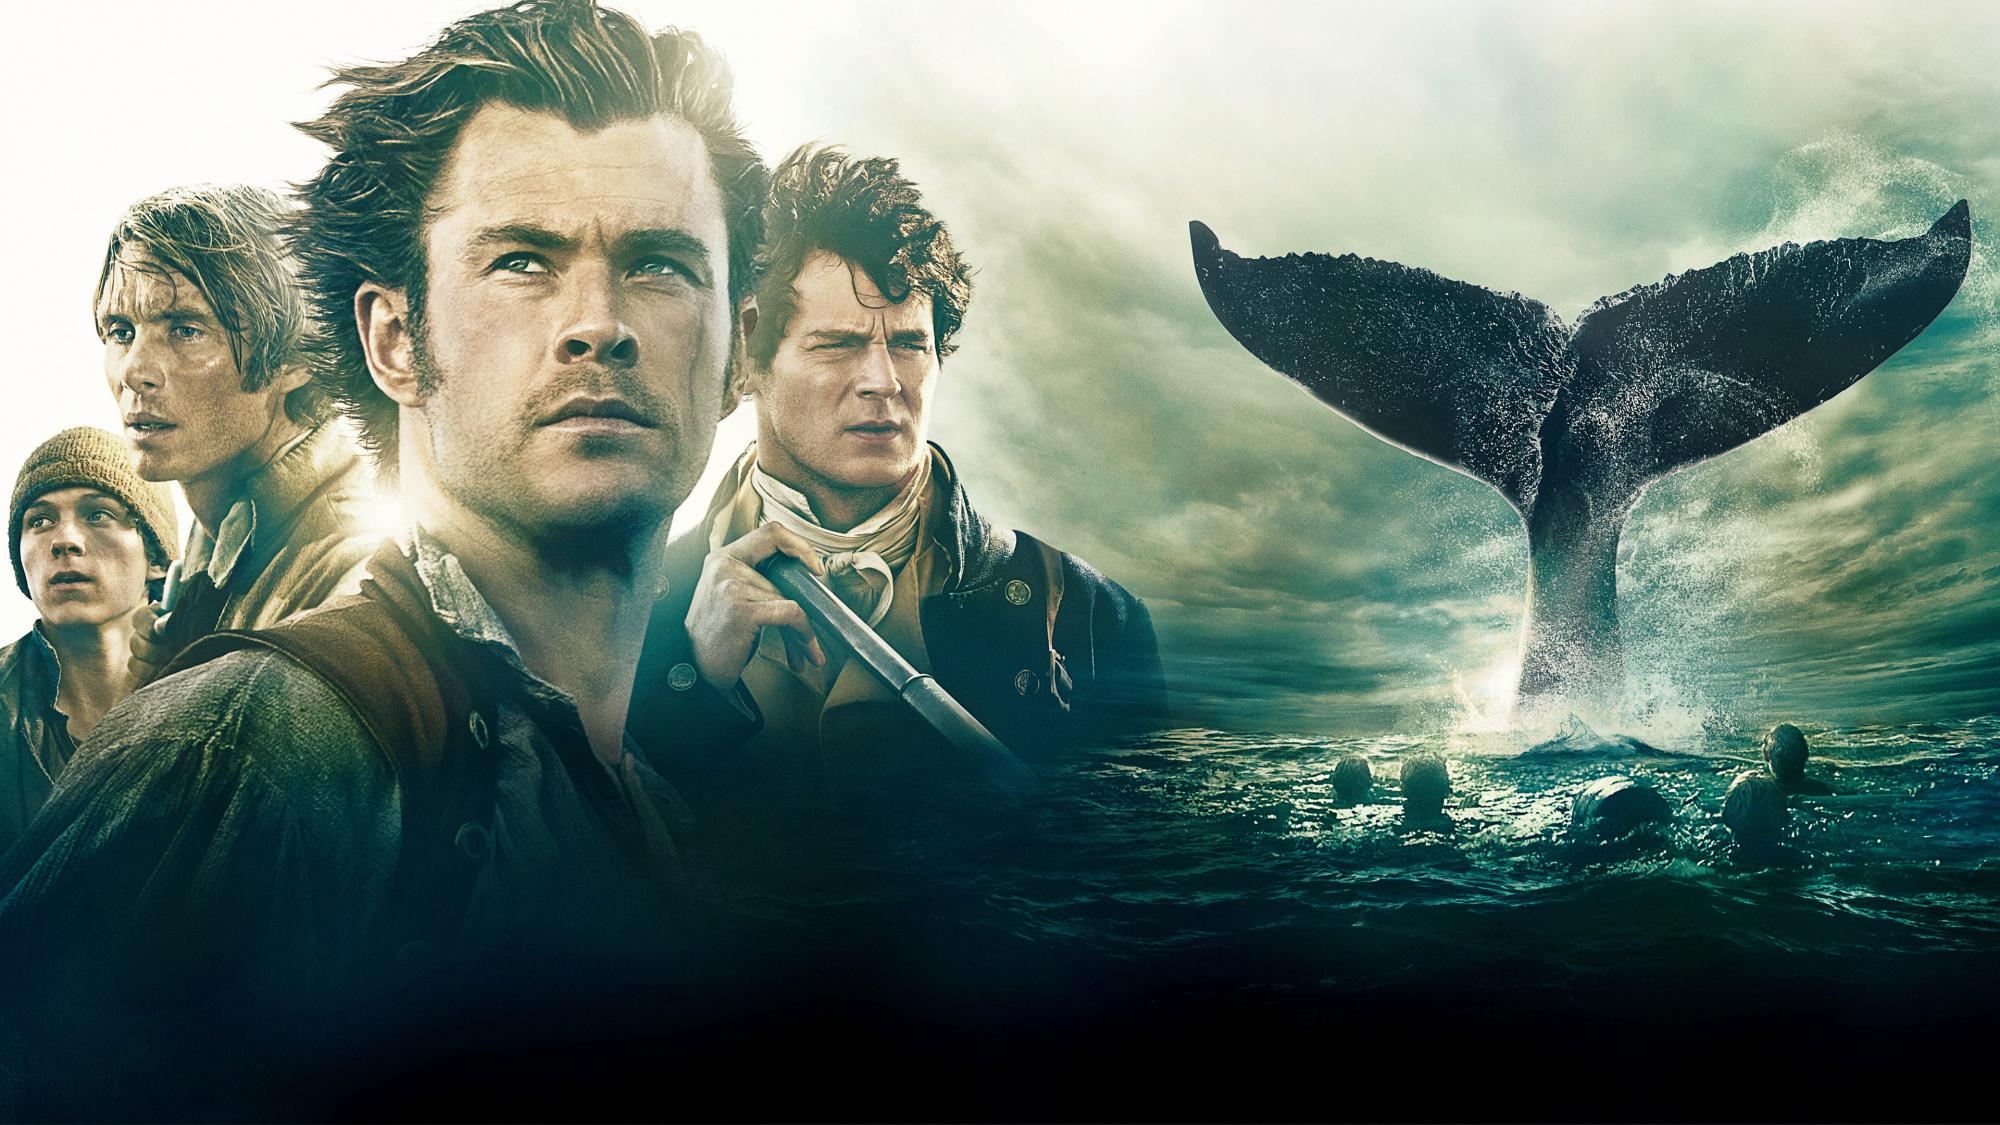 Backdrop Image for In the heart of the sea